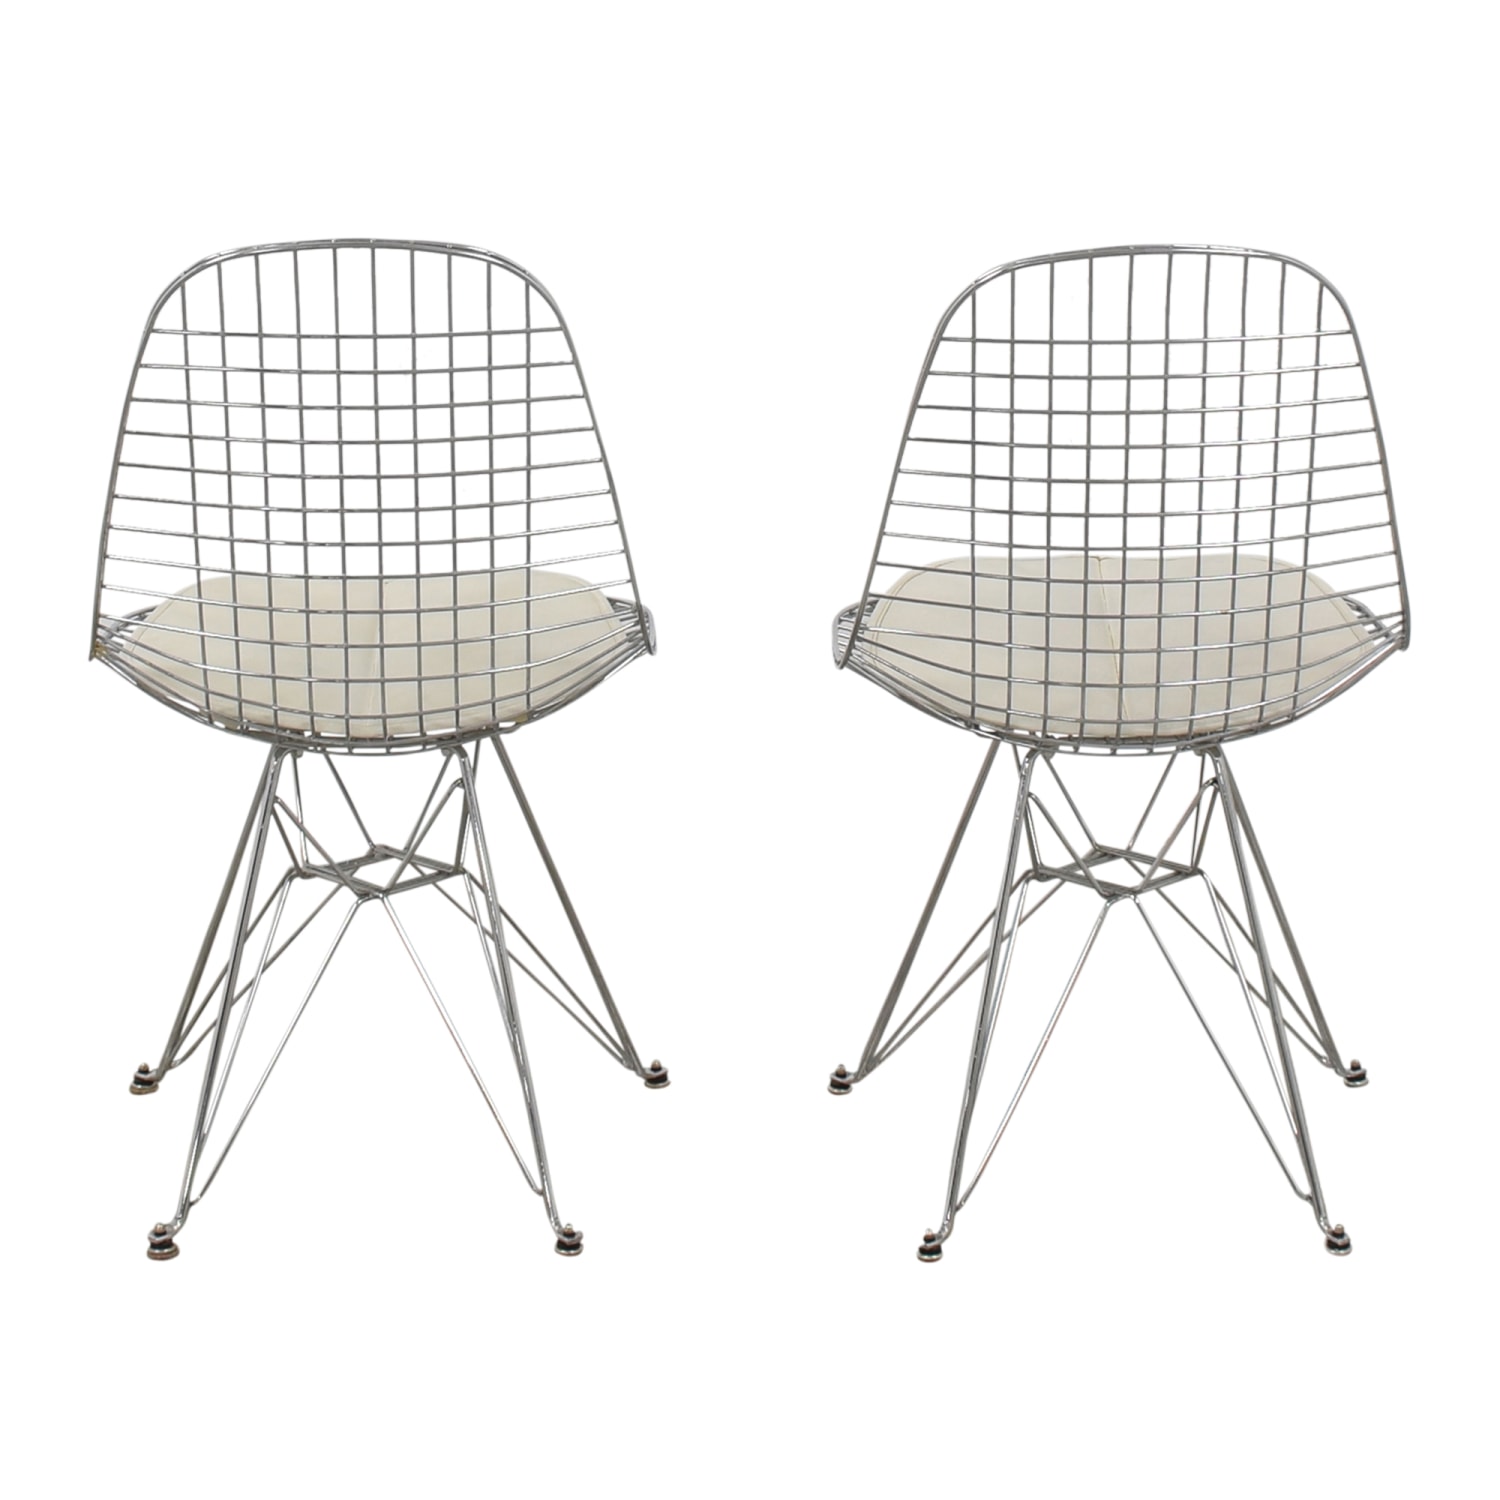 Modernica Modernica Case Study Wire Eiffel Chairs with Seat Pads discount